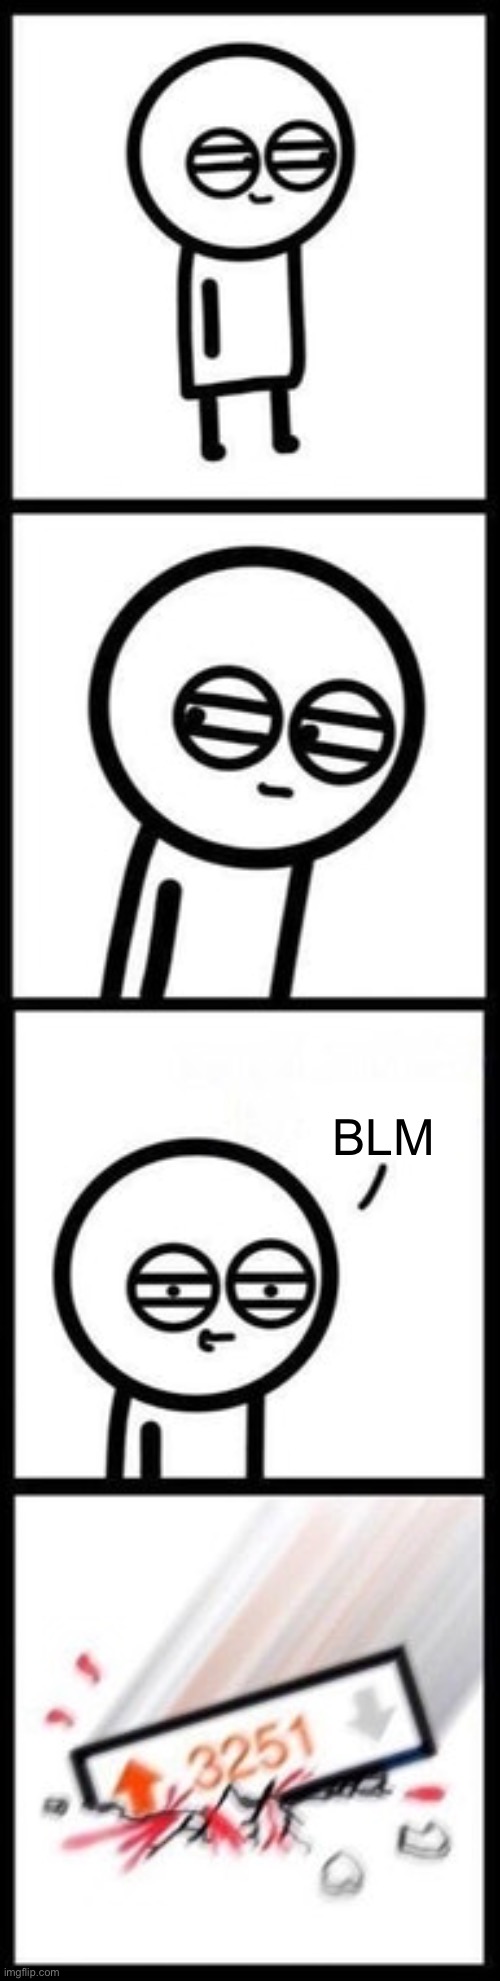 I’m not racist, but I made this | BLM | image tagged in 3251 upvotes,blm,upvotes,memes | made w/ Imgflip meme maker